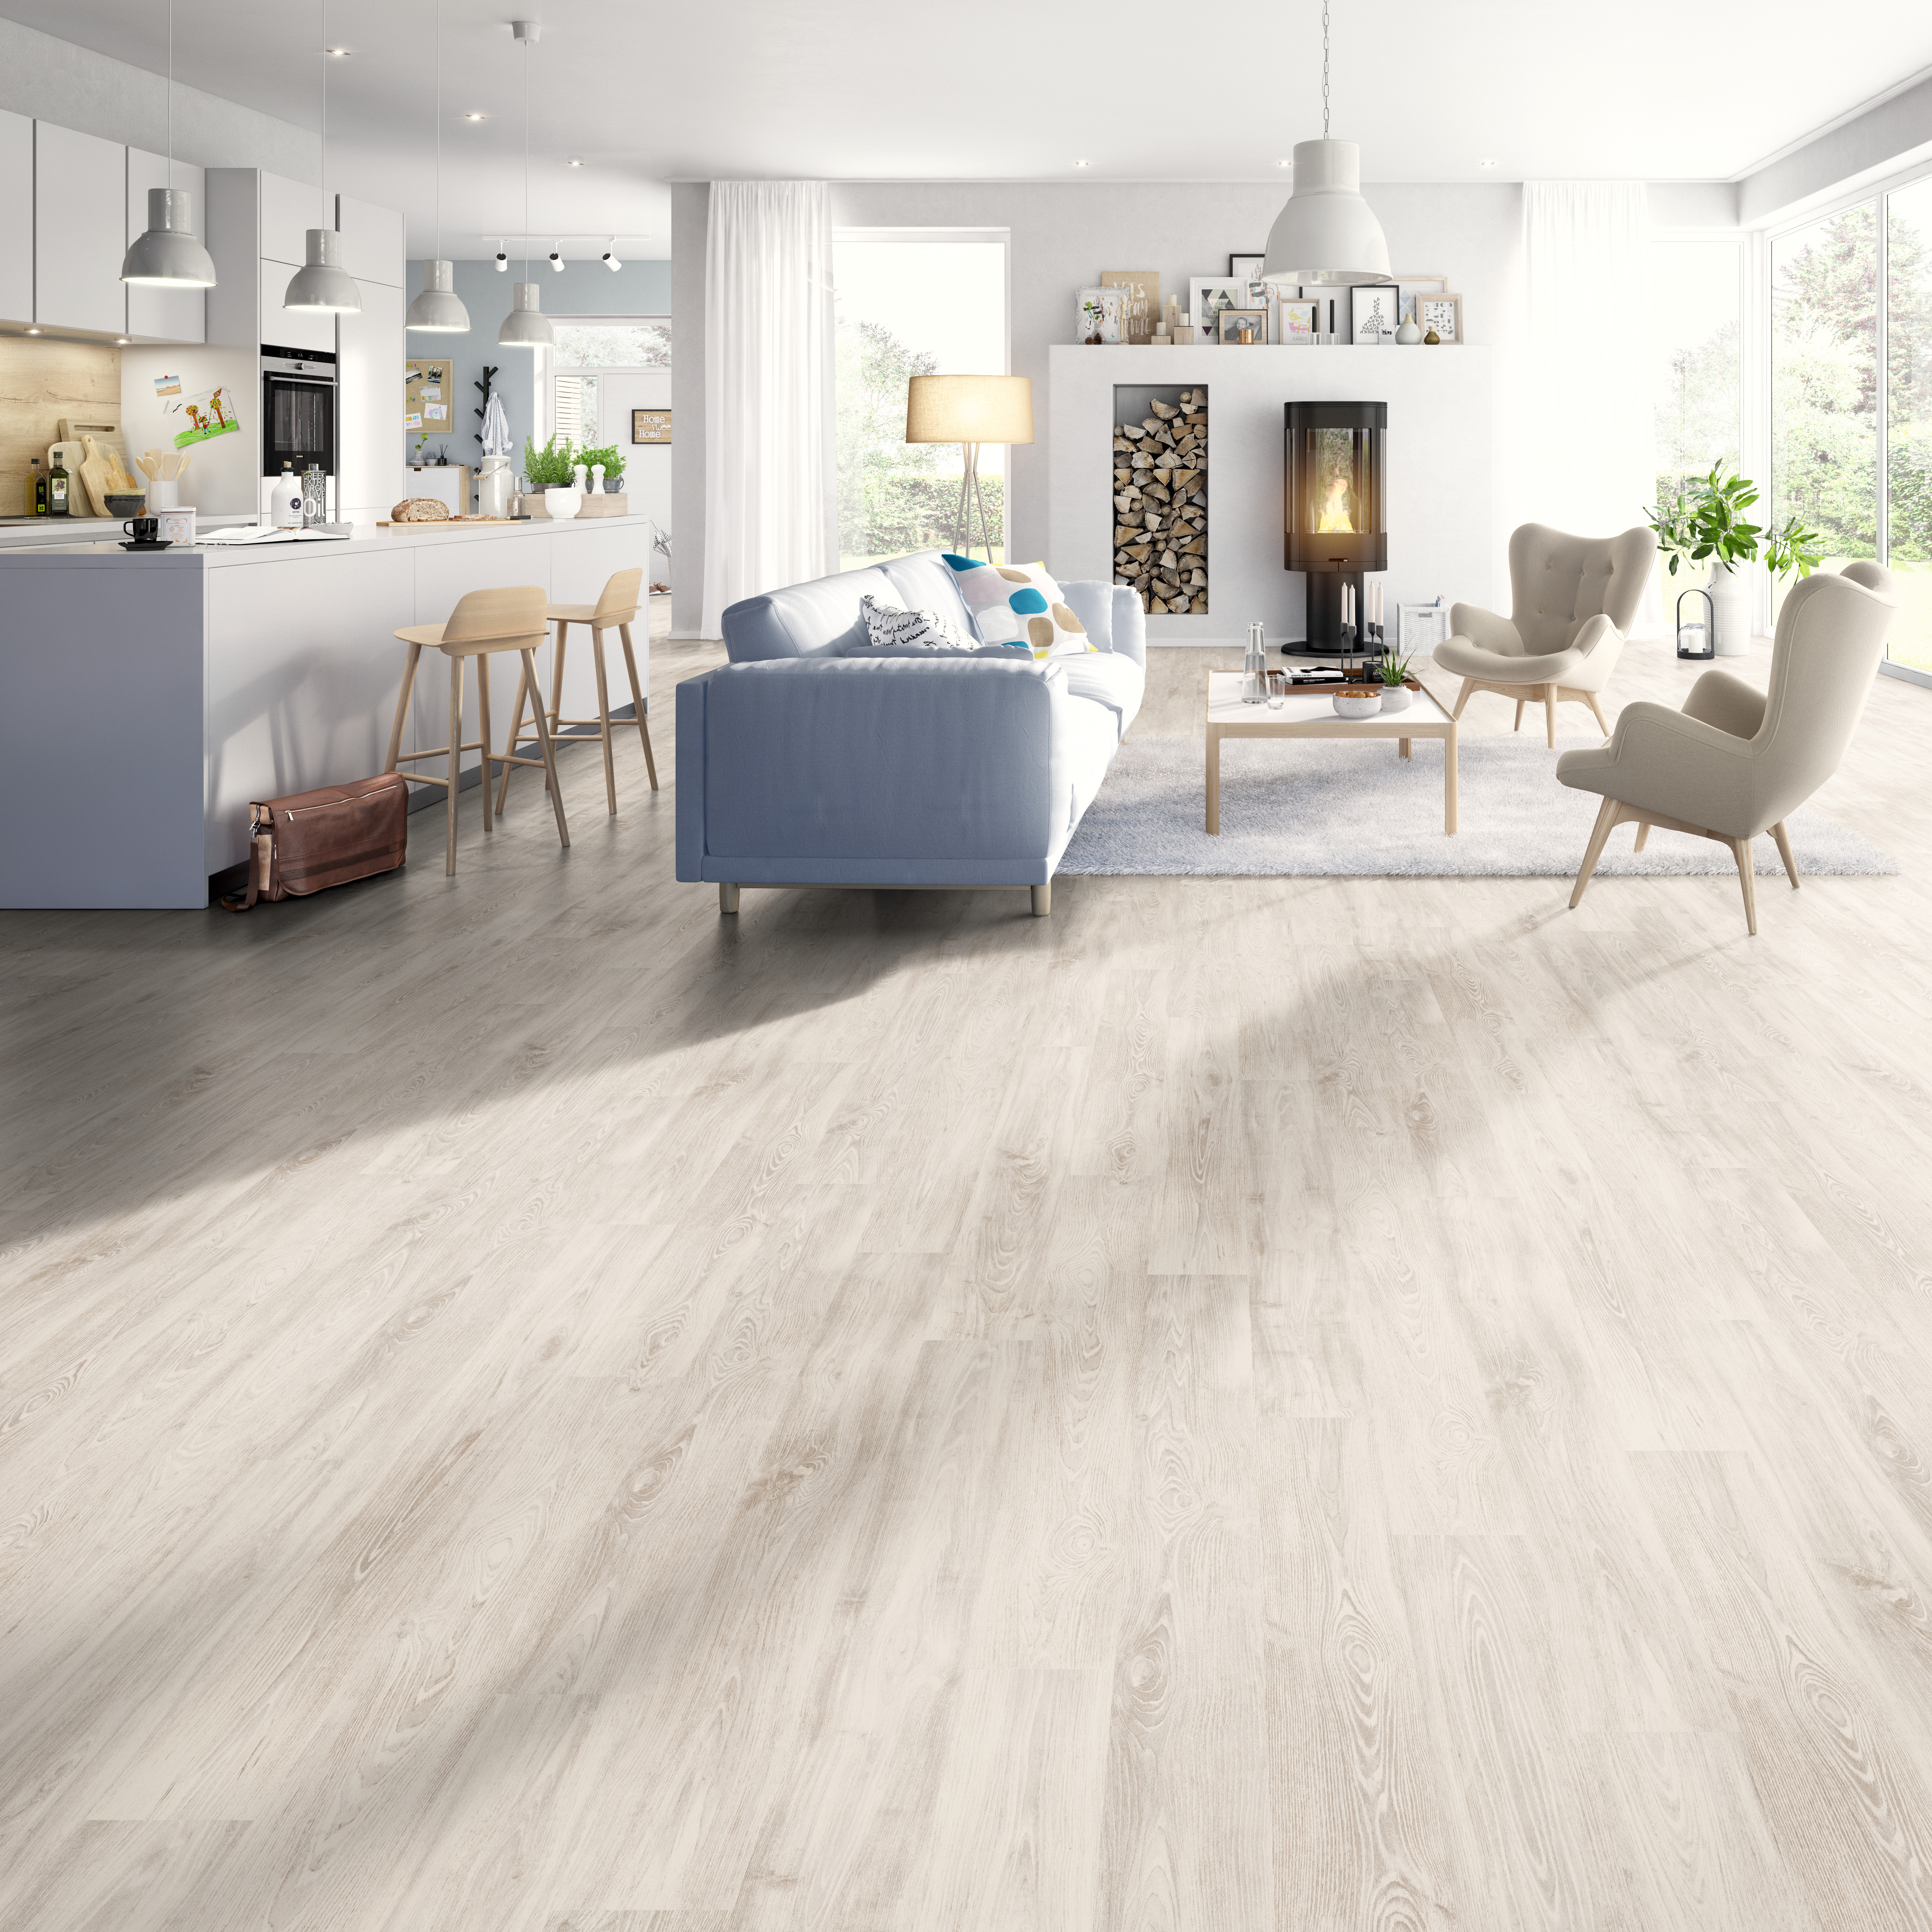 Install your flooring yourself with the EGGER HOME collection!